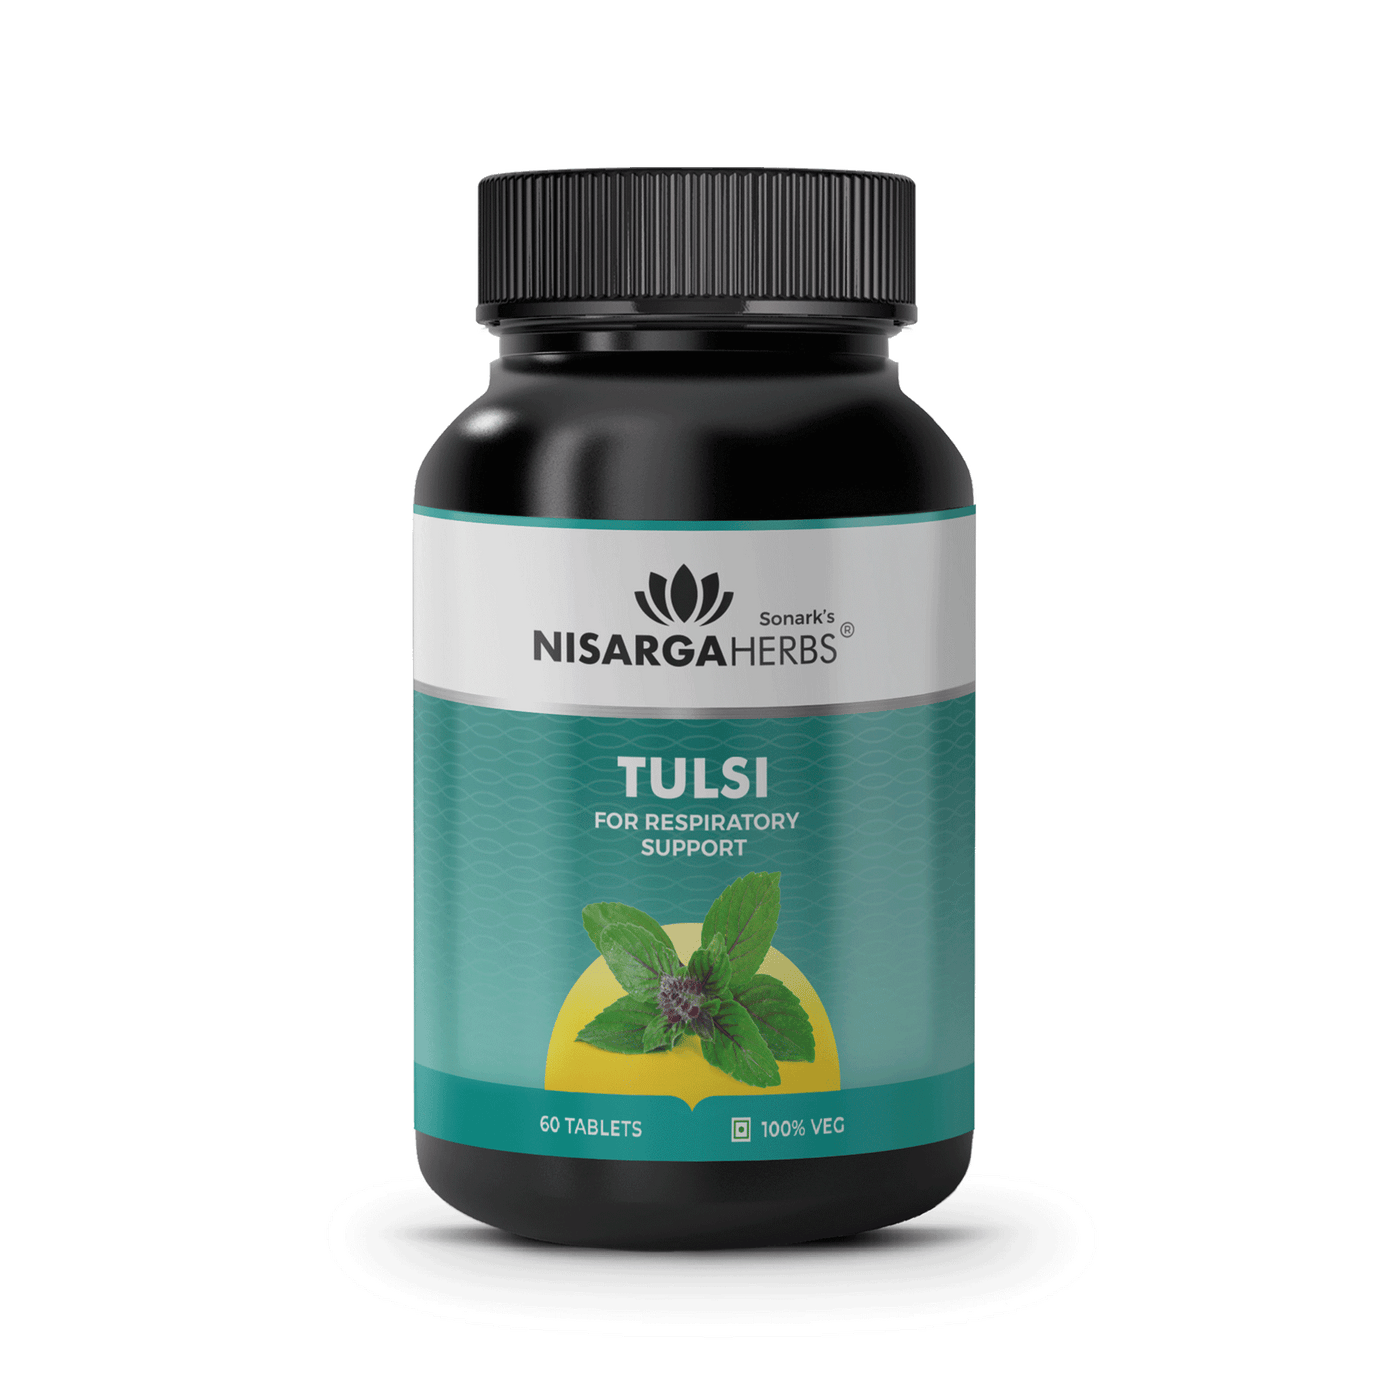 Ayurvedic tulsi tablet with benefits of Boosting immunity, Reduces viral infections, Regulates blood pressure, Contains anti-cancer properties, Supports diabetes patients, Promotes healthy skin and hair, Helps purify blood, Promotes oral health.